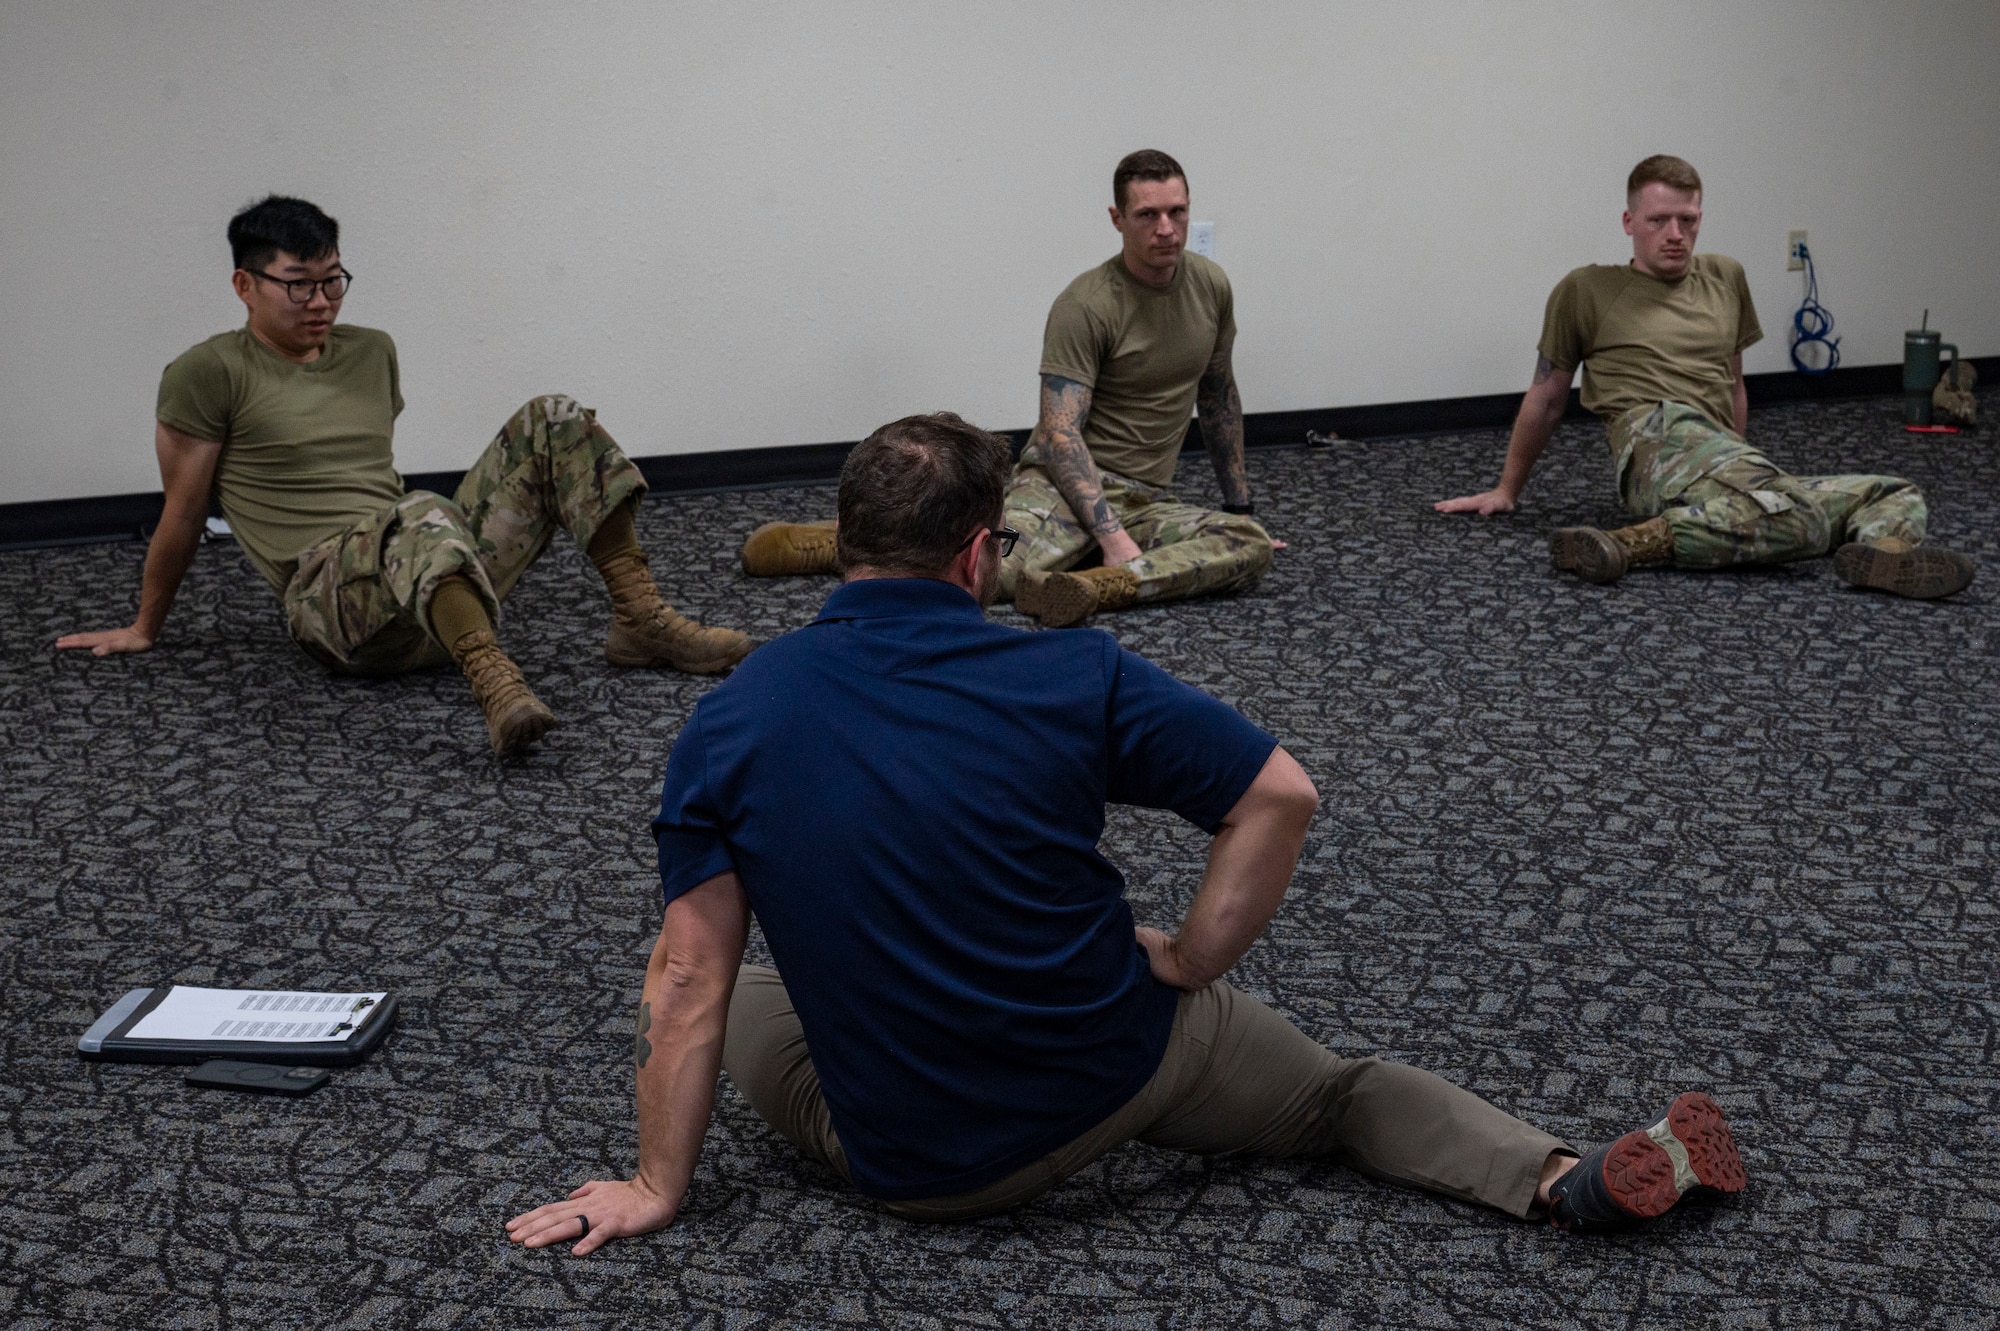 A man instructs Airmen about how to perform a stretch.